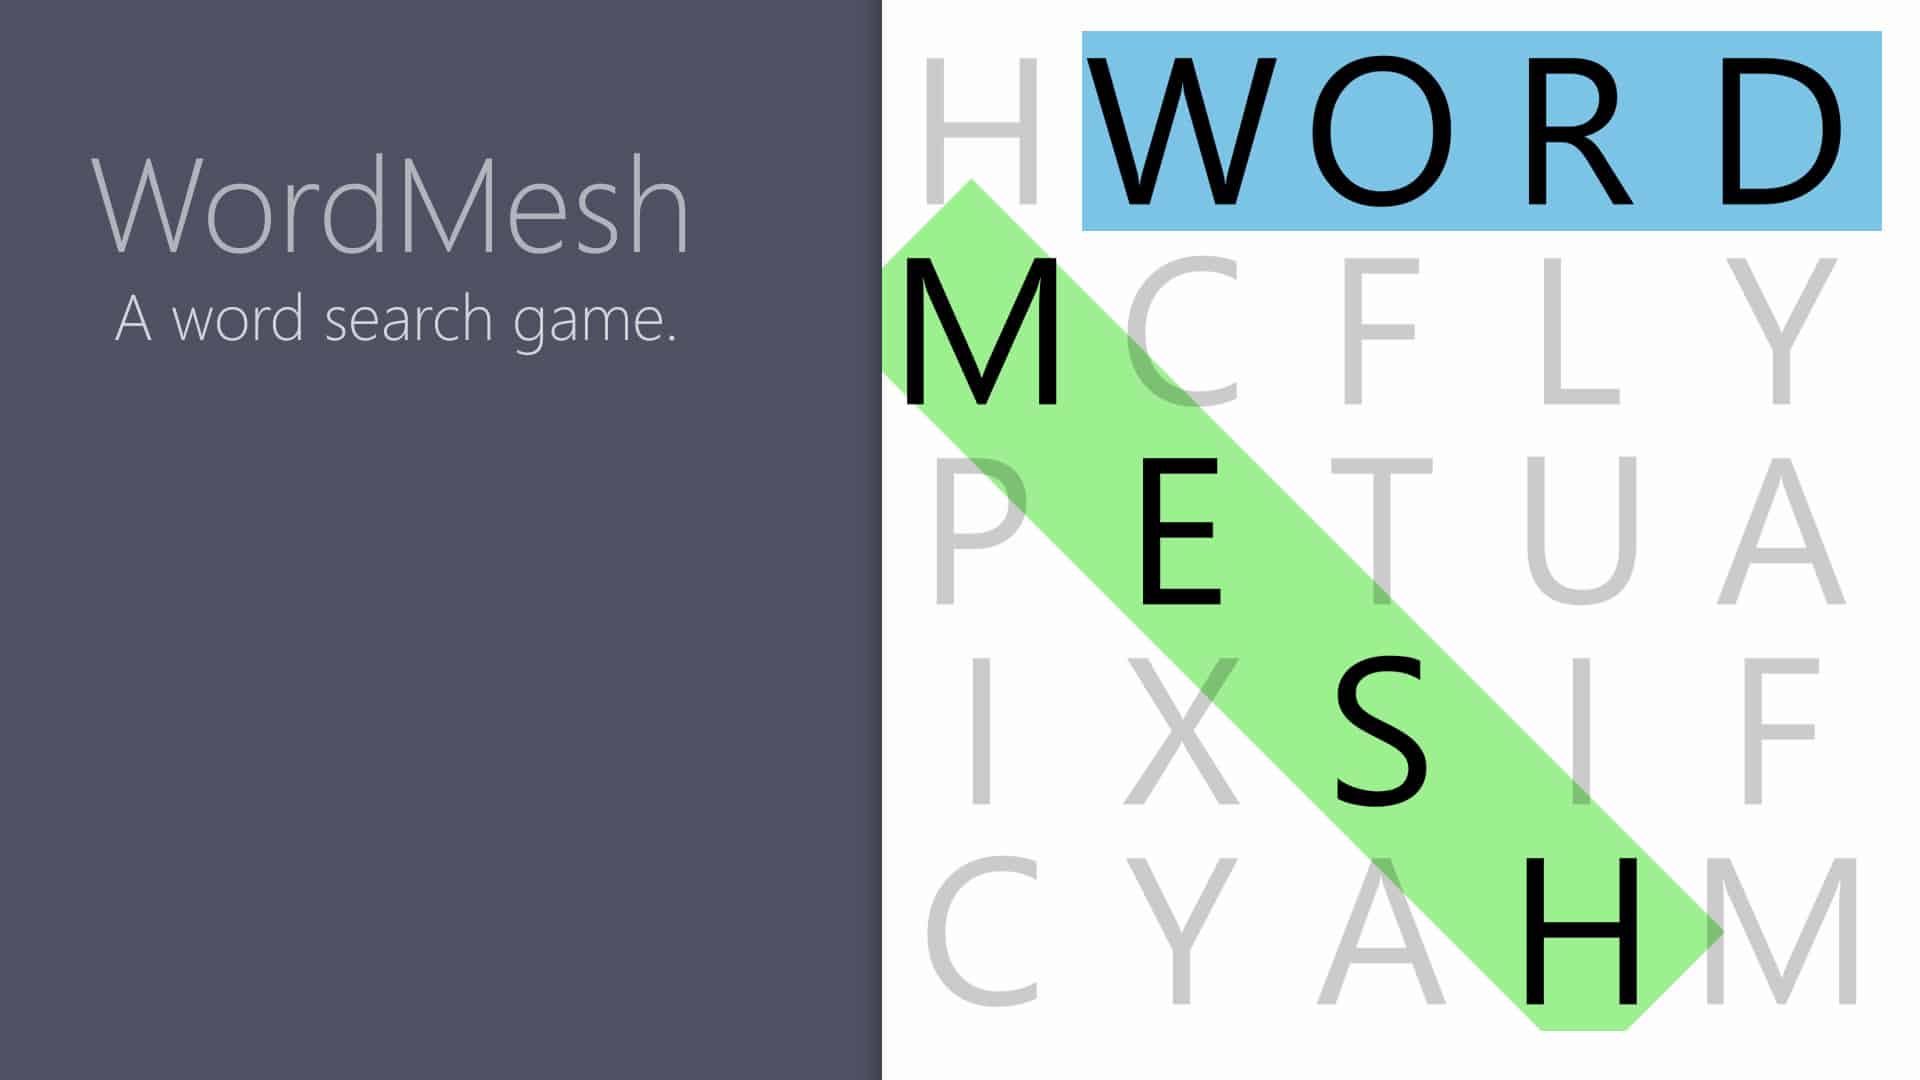 Word Mesh player count stats